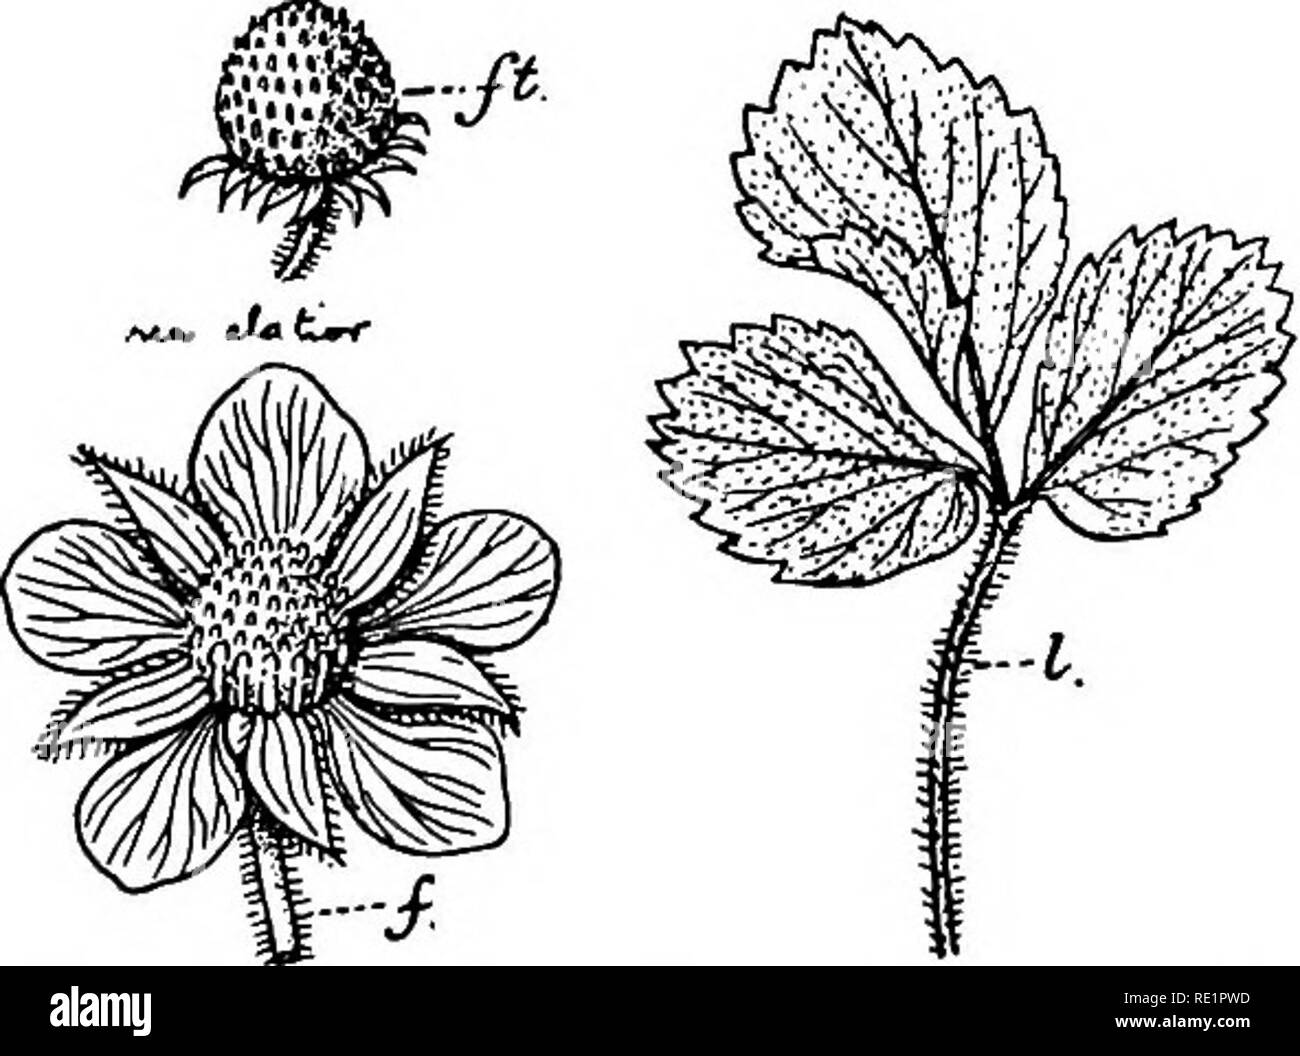 . A manual of Indian botany. Botany. 212 CLASSIFICATION nilgerrensis) (fig. 182), a trailing herb common in Shillong, has a globose, pale-pink fruit. Some of the Rosaceae resemble Ranunculaceas in the structure of their flowers. Nat. Order 3. CrassulacecB.—Herbs or under-shrubs. Stems and leaves usually succulent. Leaves usually simple, sometimes lobed. Flowers regular. Sepals 4 to 5, connate, inferior. Petals 4 to 5, free. Stamens as many as, or twice as many as the petals, hypo- gynous or epipetal- ous. Carpels 4 to 5, apocarpous. Fruit usually follicular. Seeds albuminous. General in the No Stock Photo